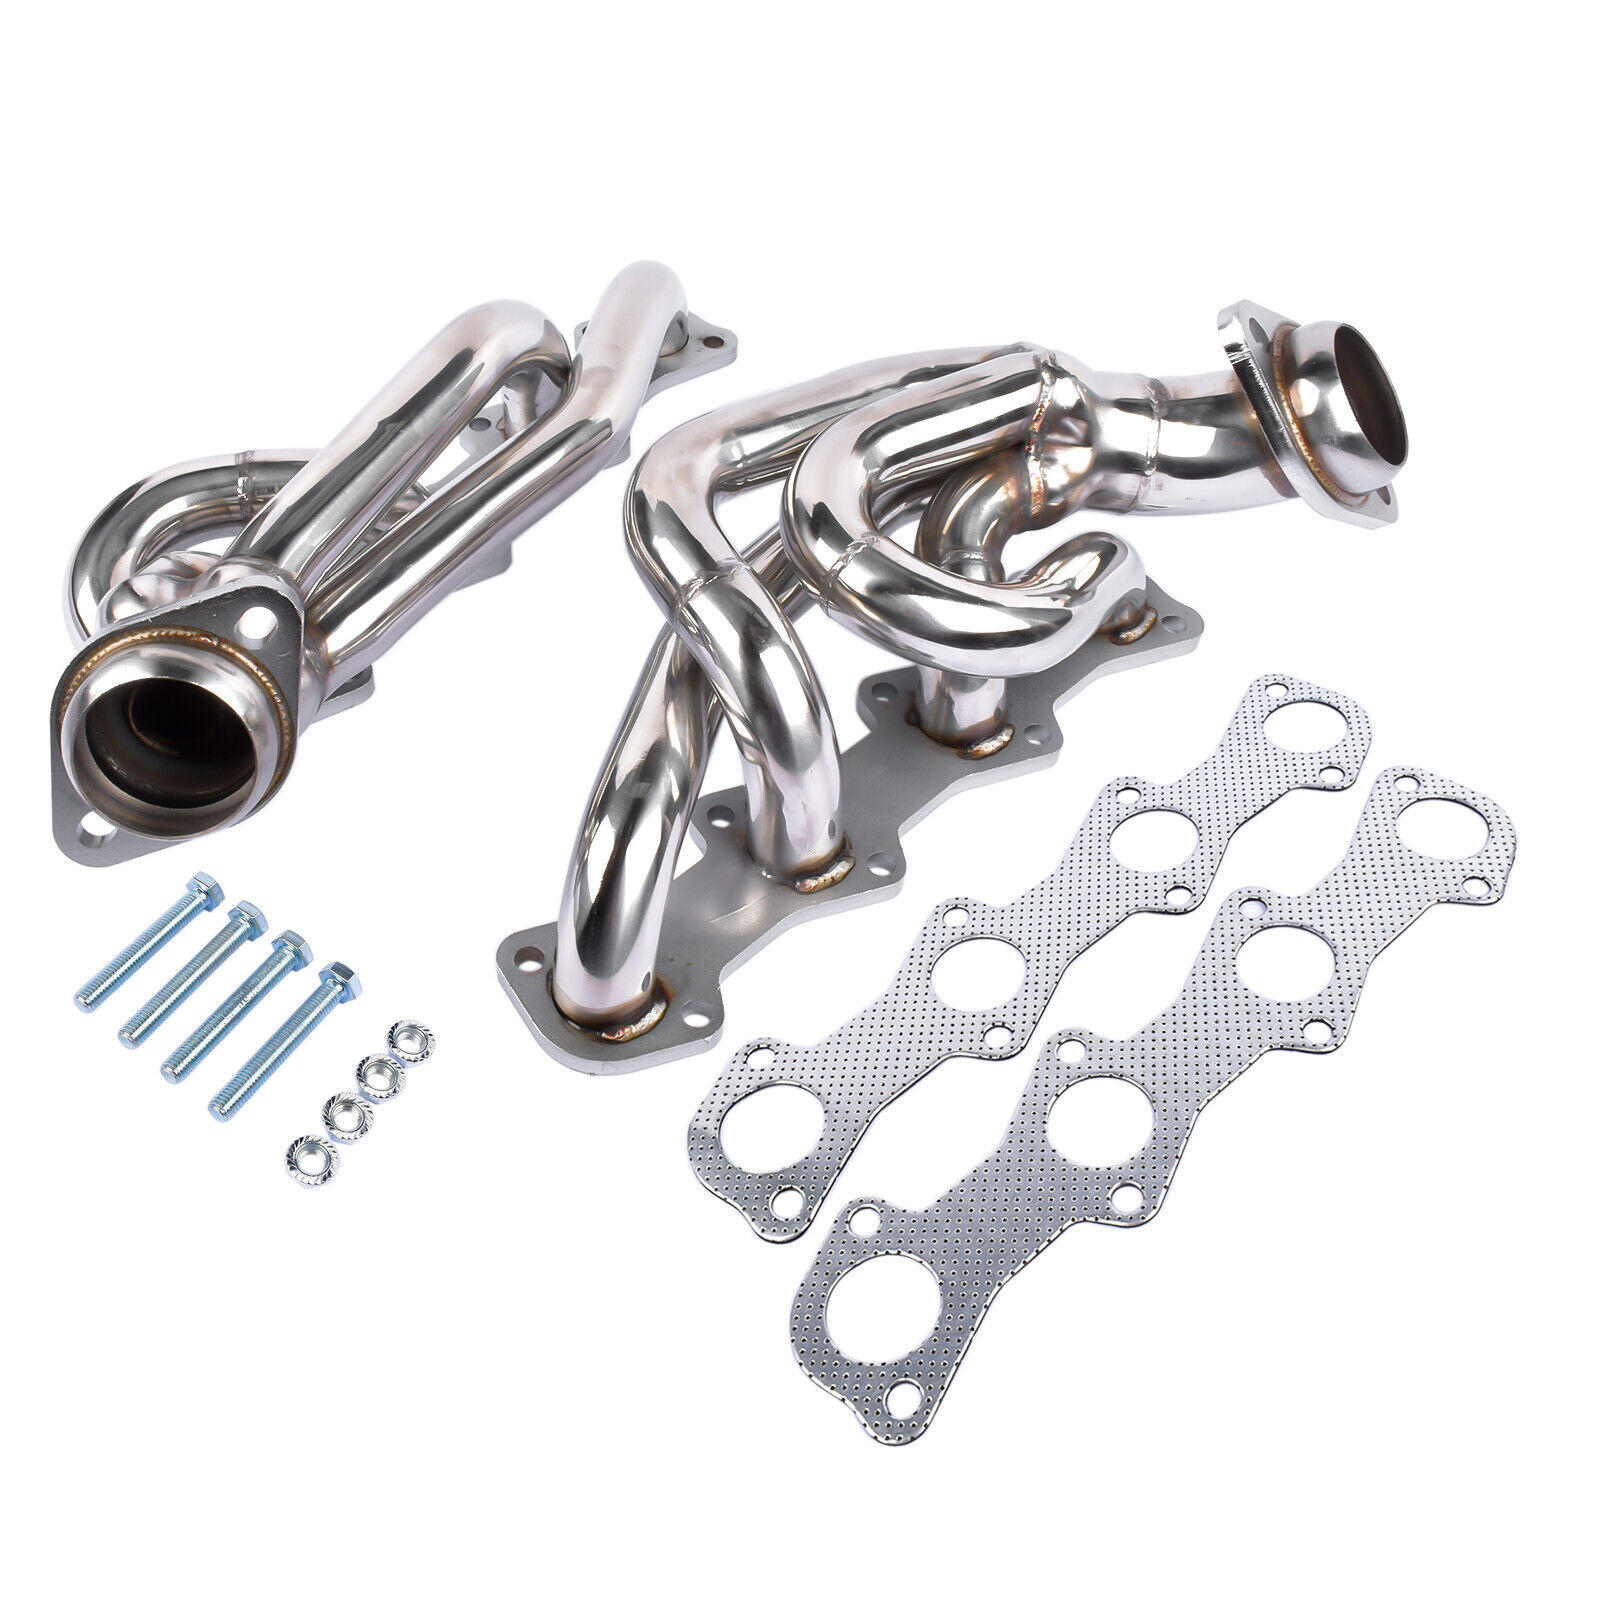 Shorty Manifold Header for Ford F150 F250 Expedition 1997-2003 5.4L V8 Engines